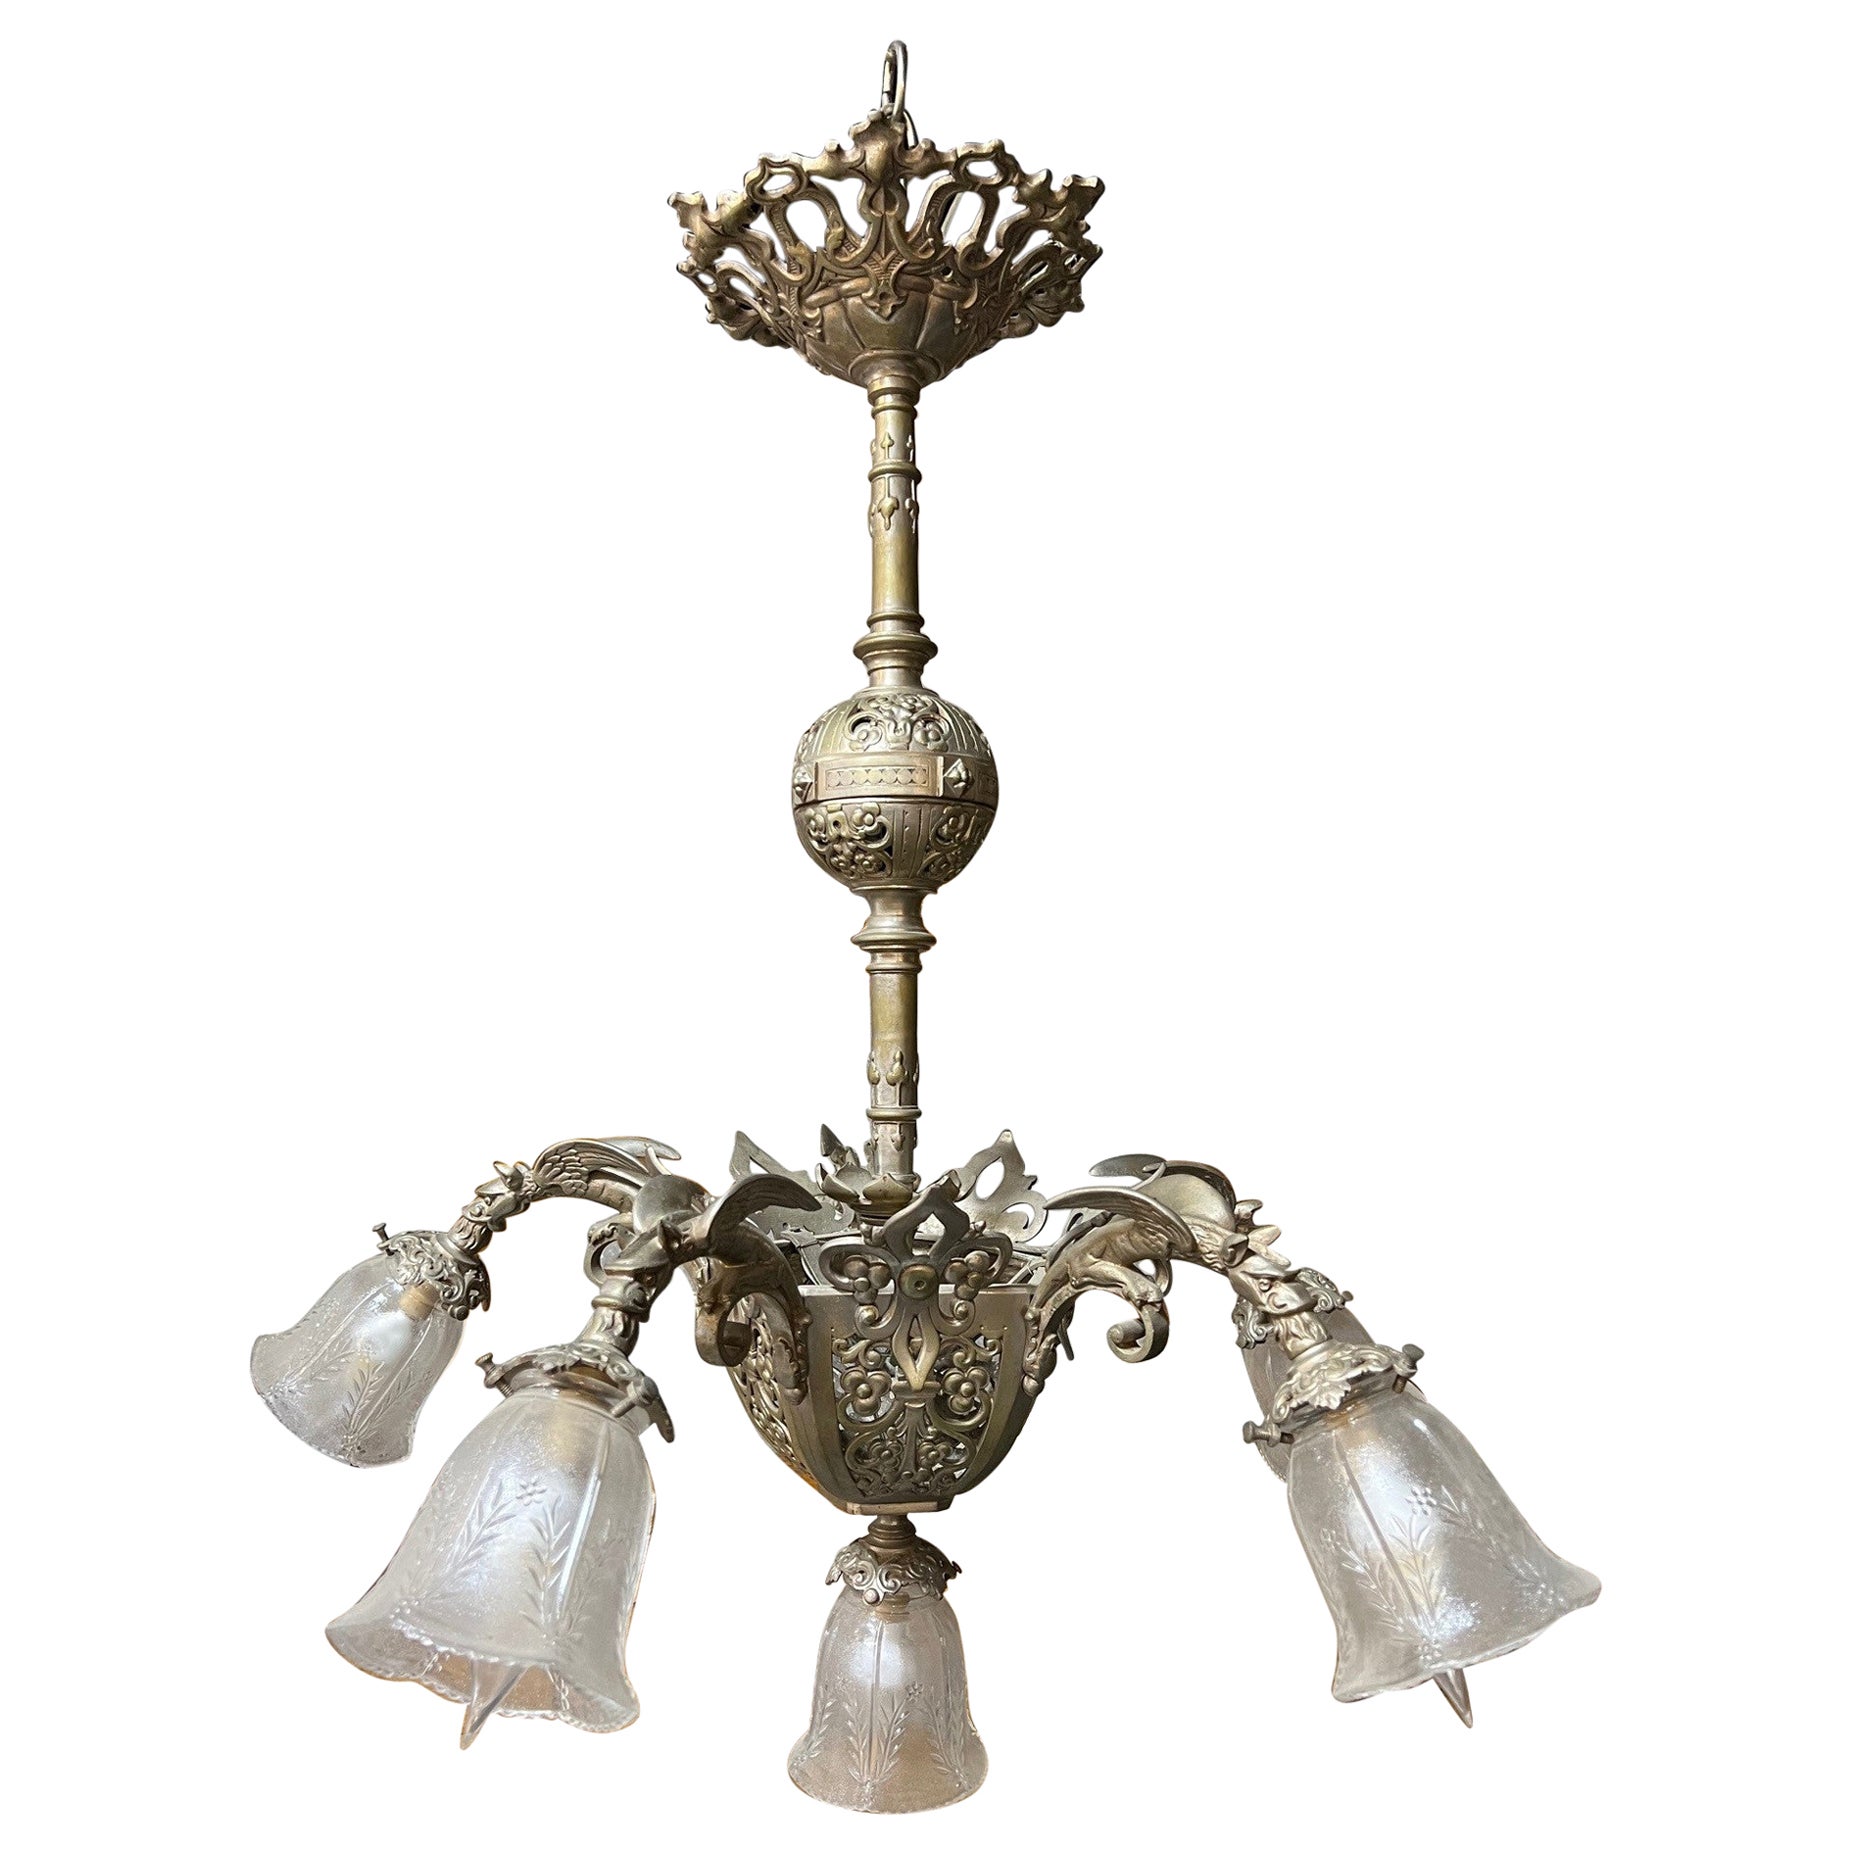 Antique Brushed Nickel Finish Brass 6 Light Chandelier with 5 Griffin Arms 